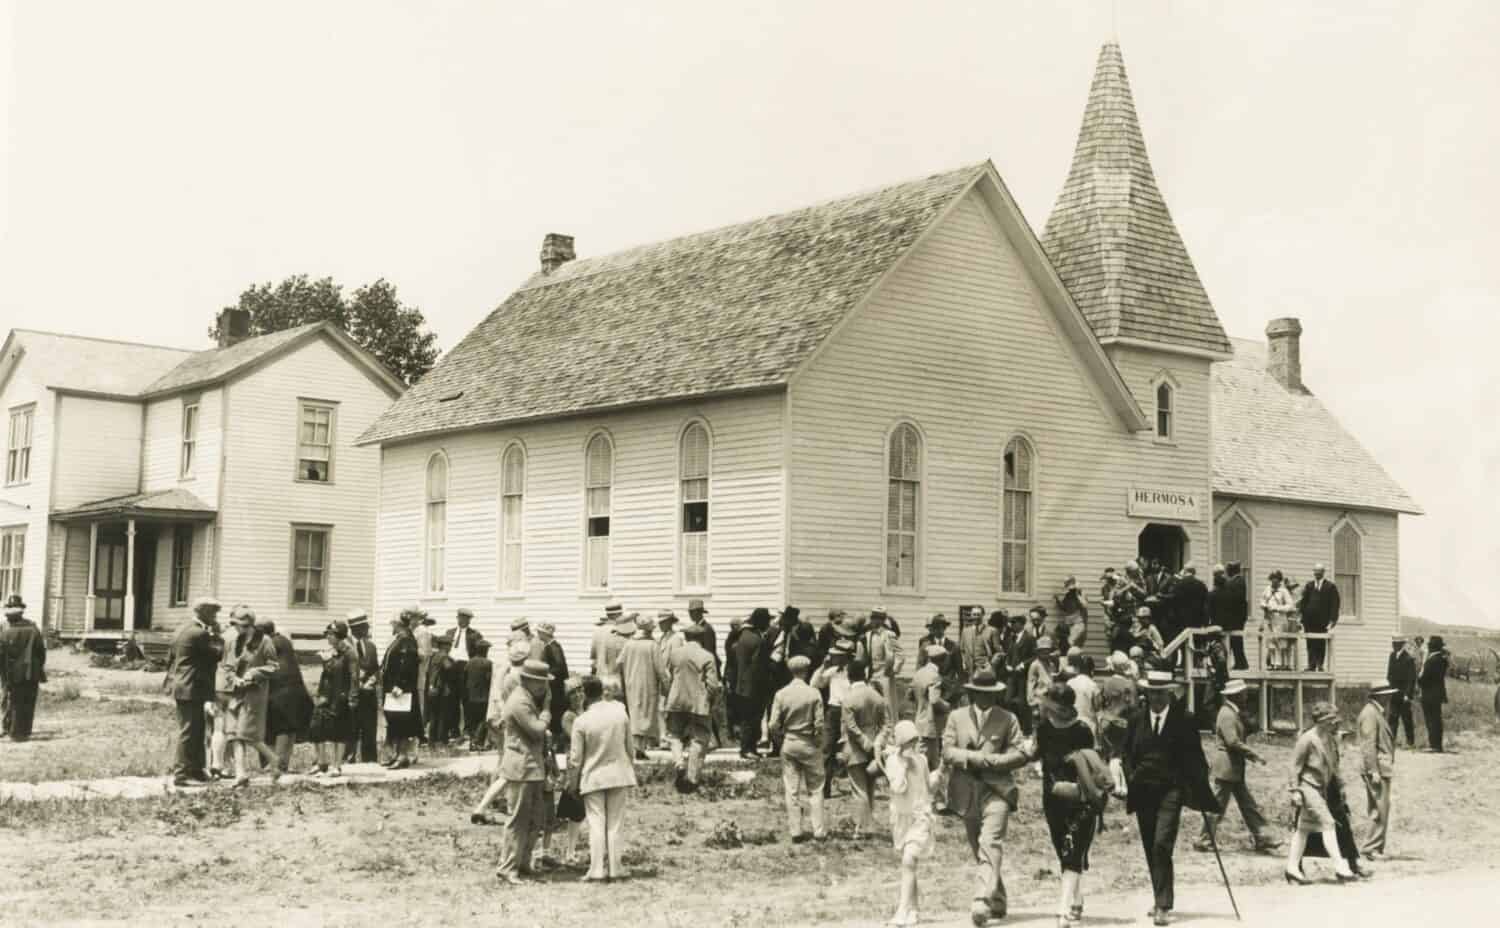 Congregational Church after Sunday service, Hermosa, South Dakota, in June 1927. President Calvin and Grace Coolidge spent a 3-month vacation at State Game Lodge in nearby Custer State Park. They atte